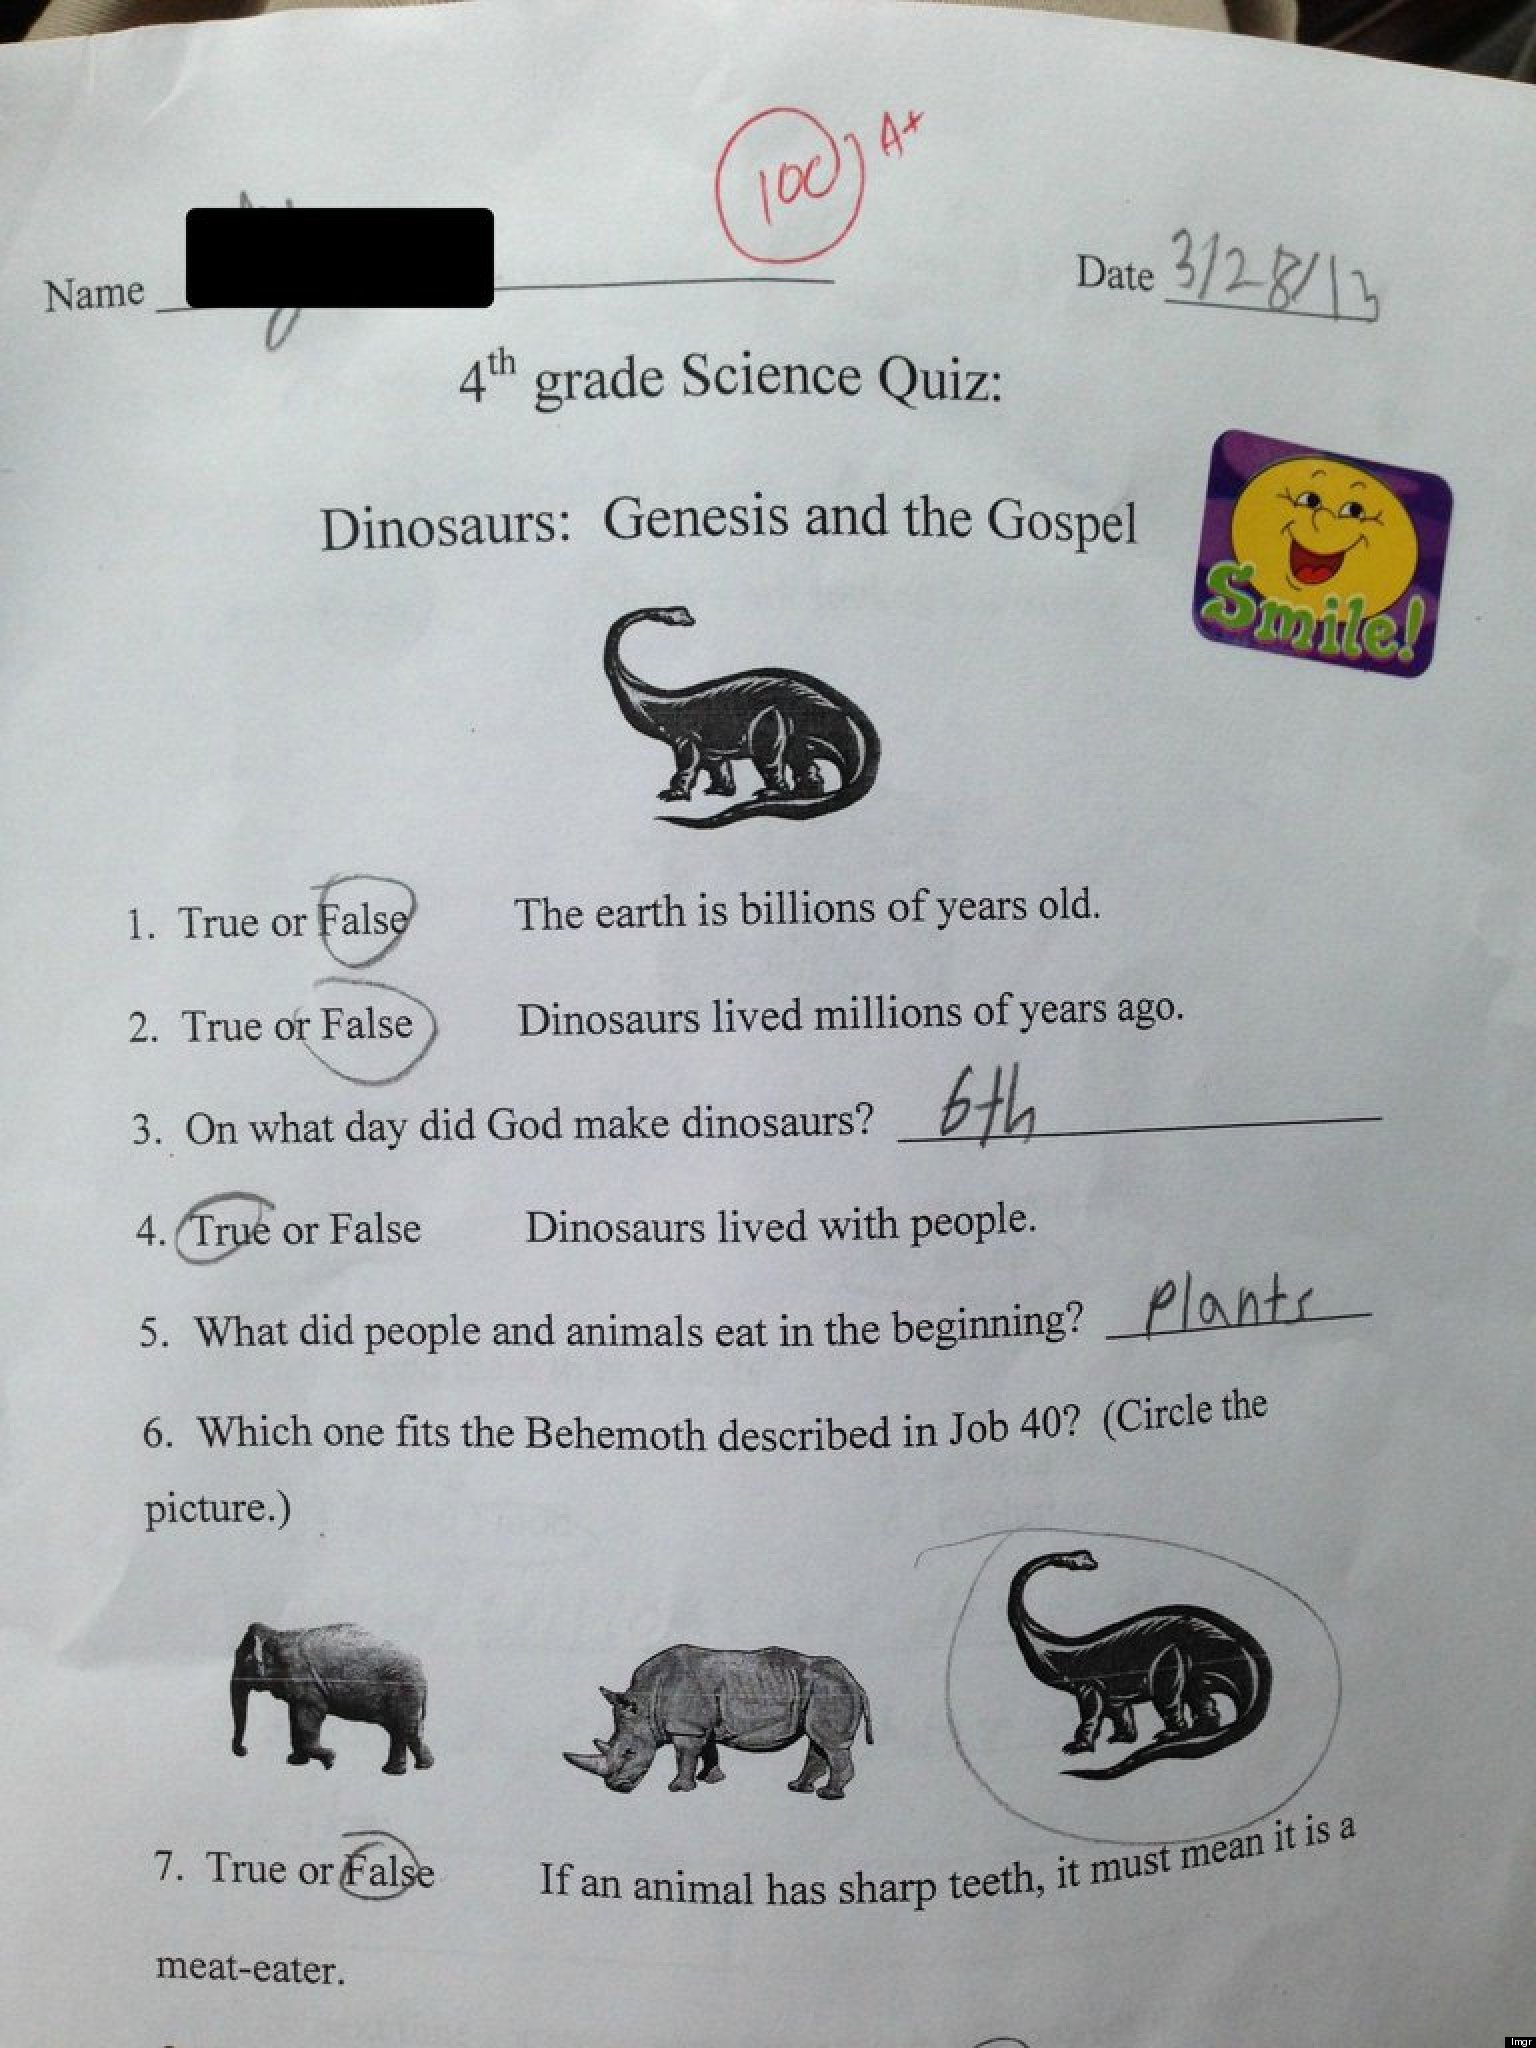 4th-Grade 'Science Test' Goes Viral: Creationism Quiz Claims Dinosaurs